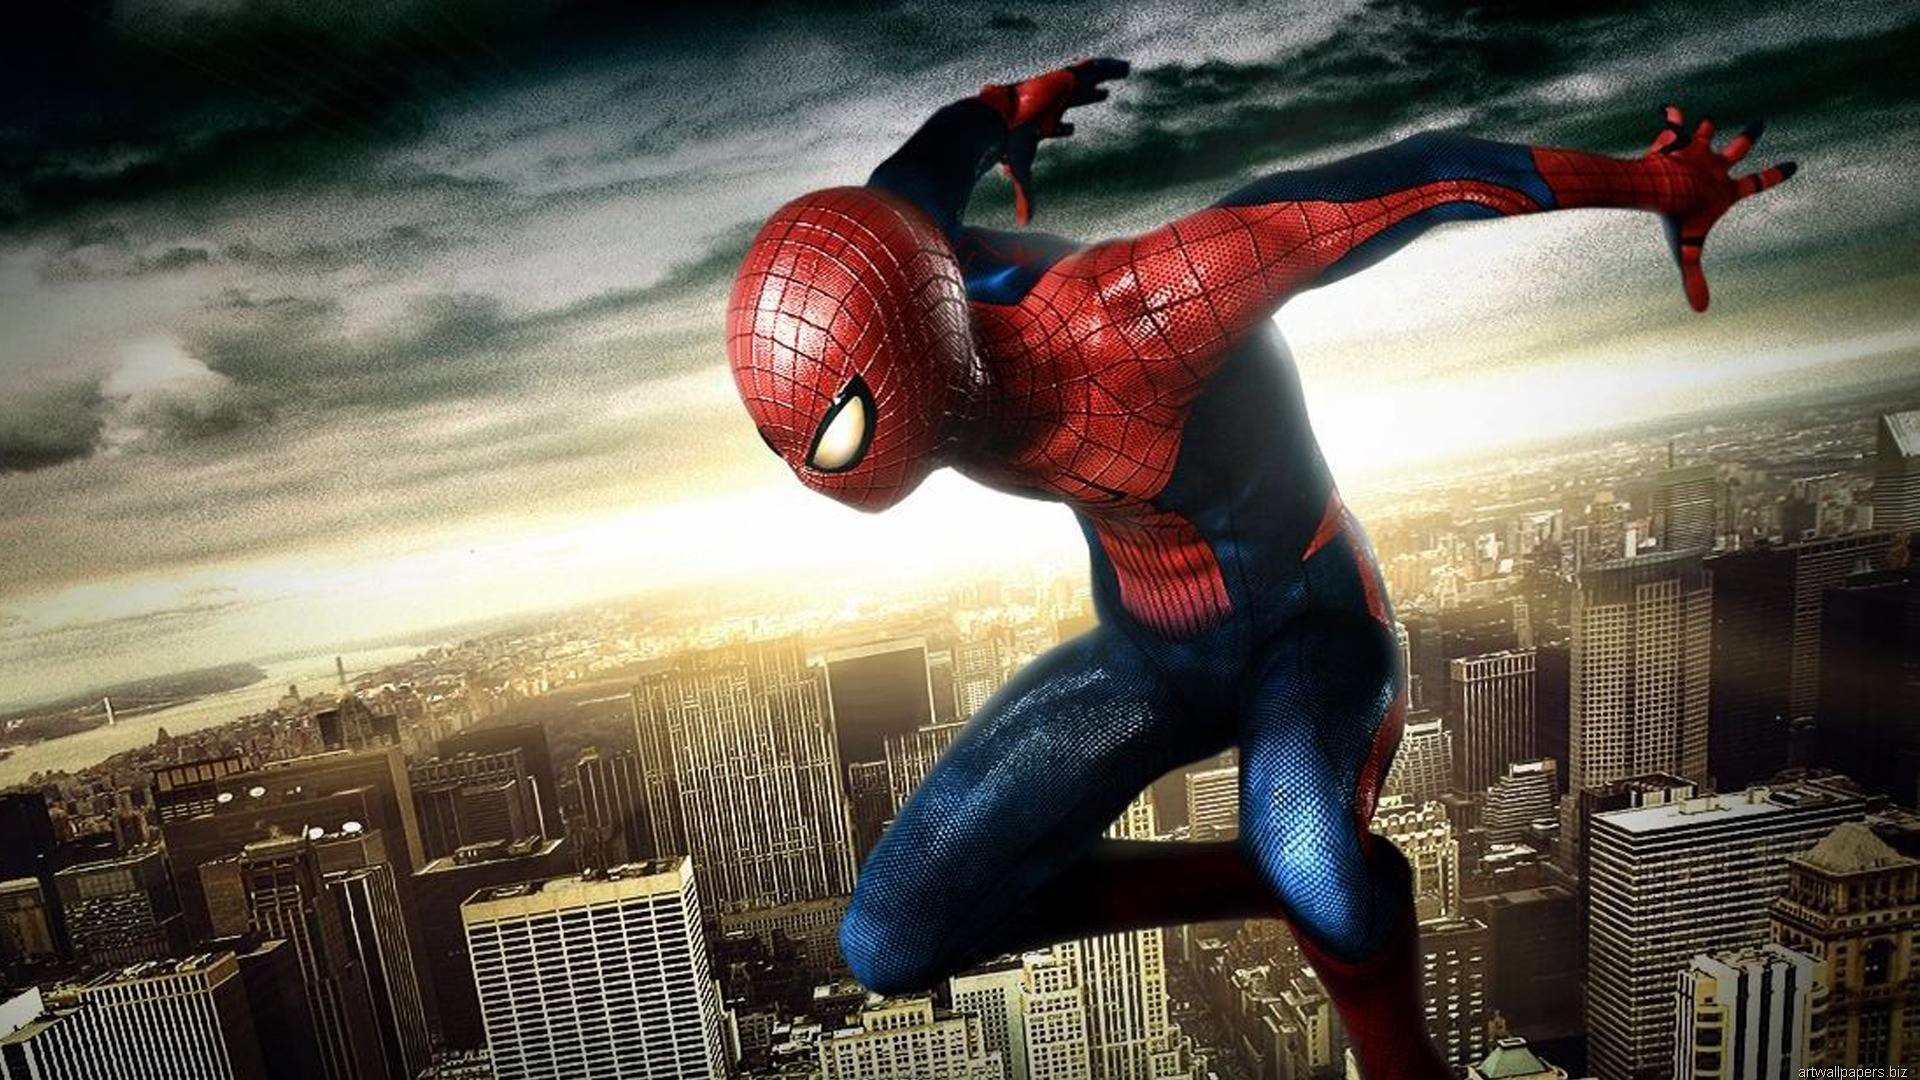 The Amazing Spider-Man YIFY subtitles - details